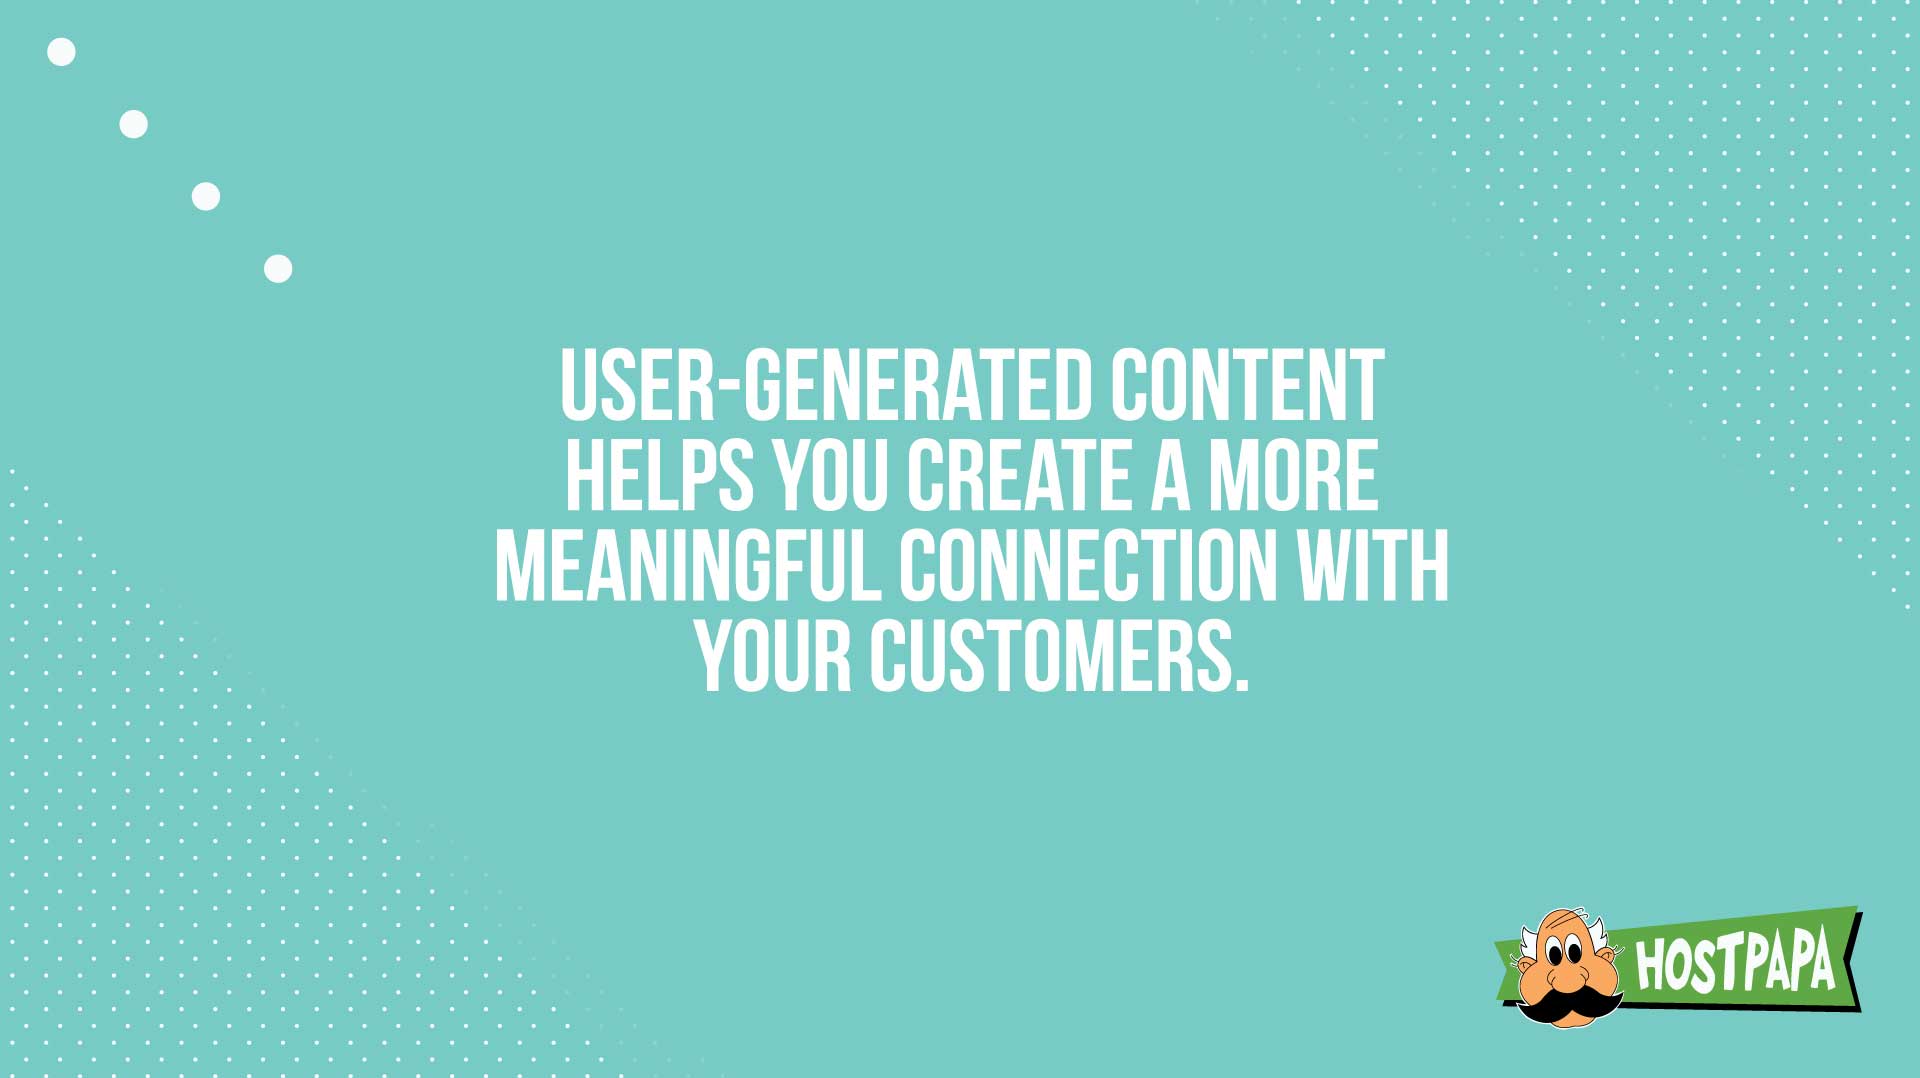 UGC helps you create a more meaningful connection with your customers